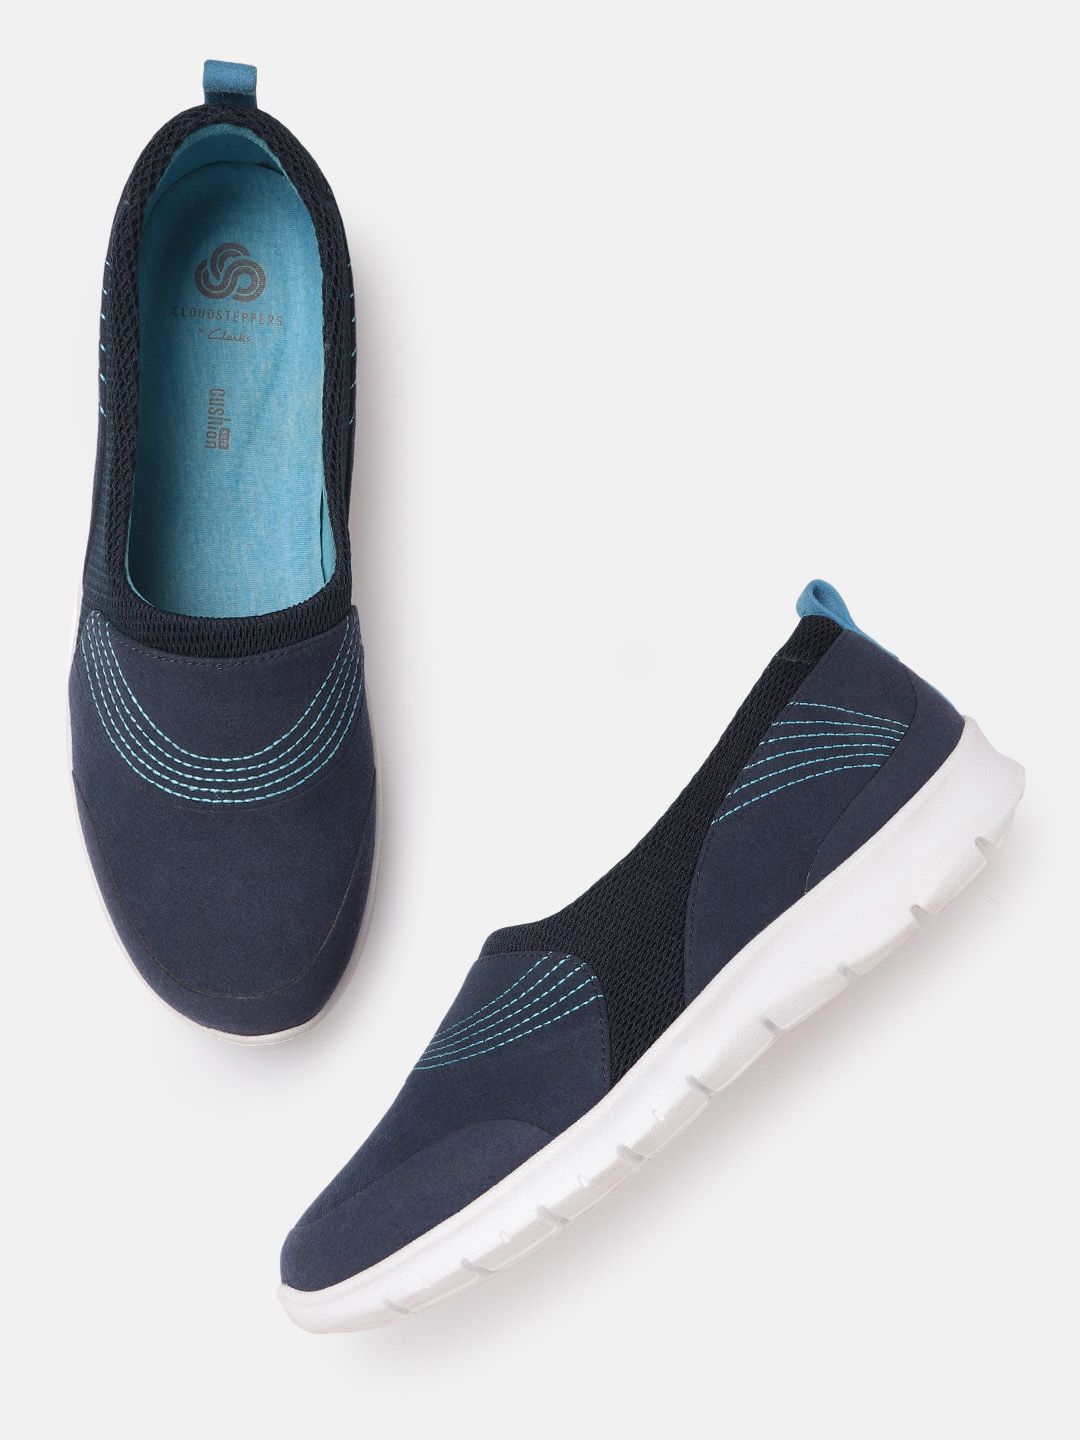 Clarks Women Navy Blue Slip-On Sneakers with Woven Design Detail Price in India